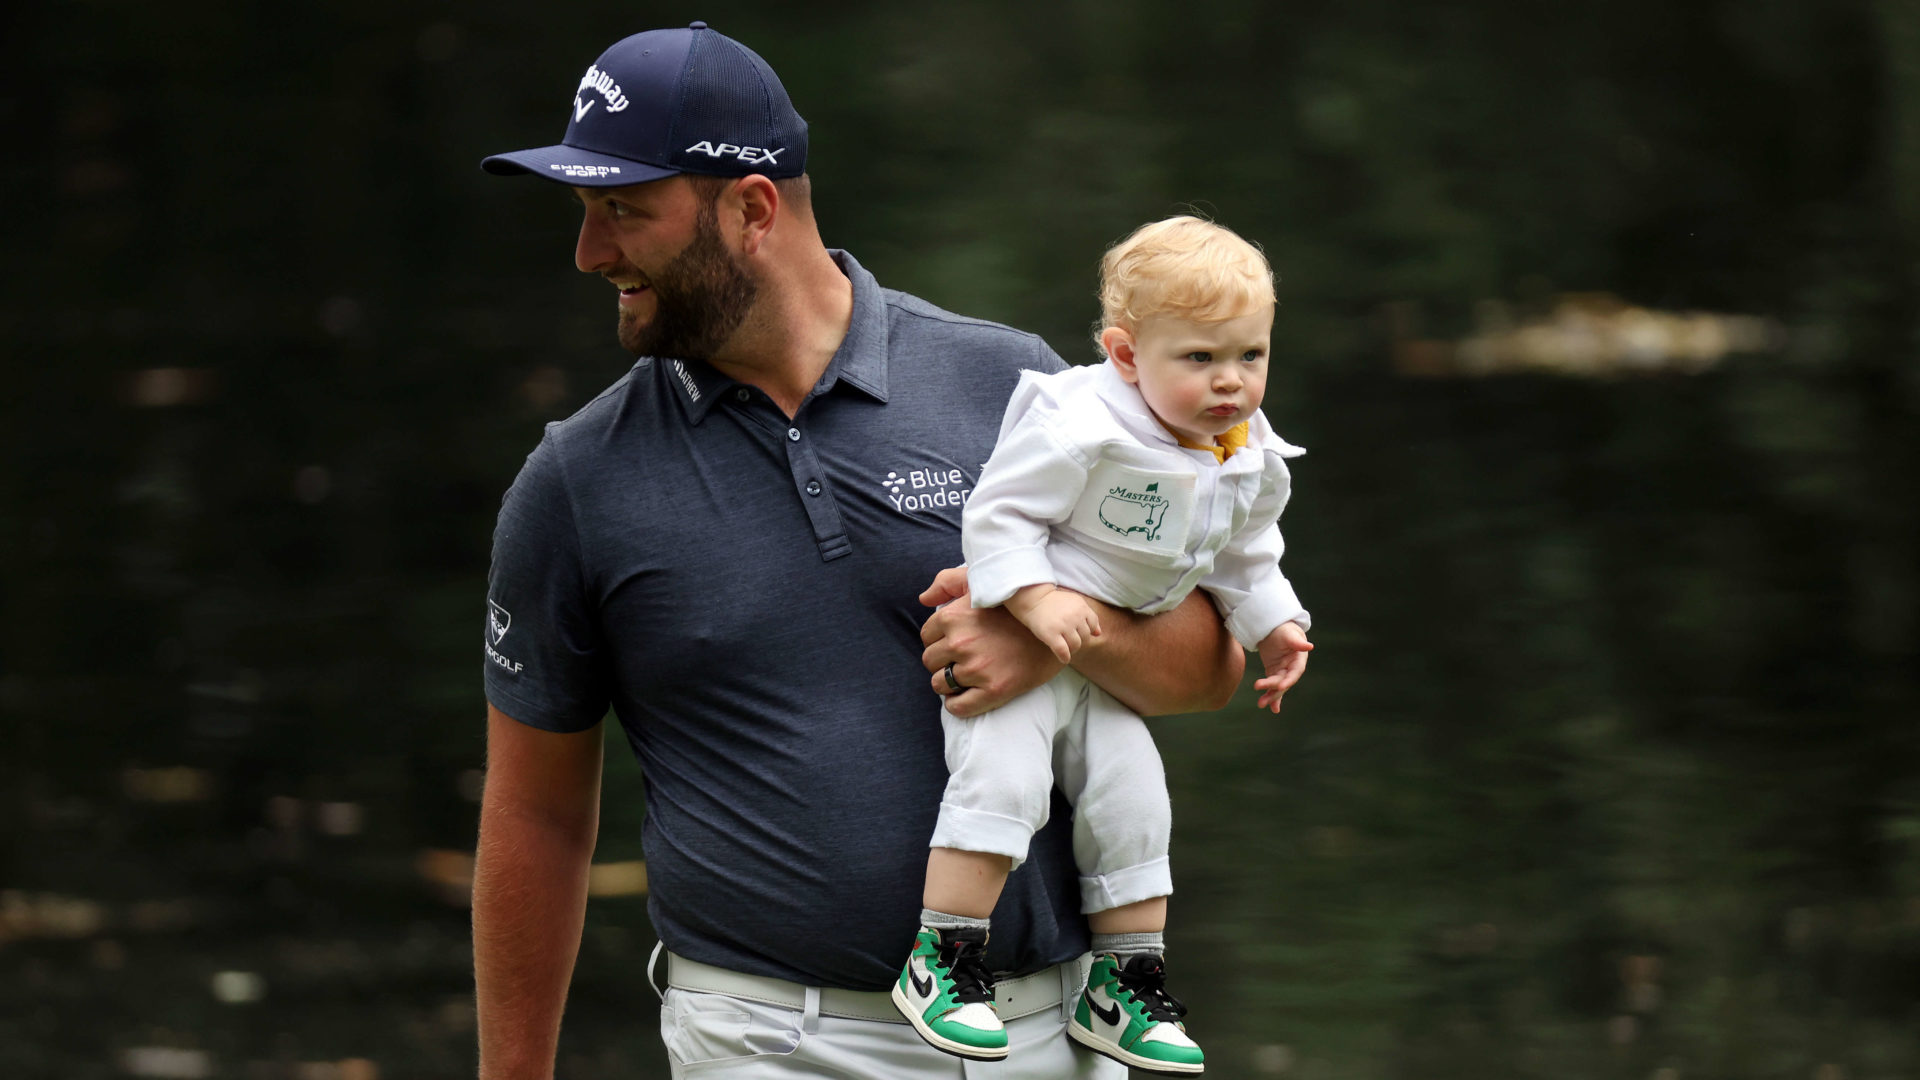 AUGUSTA, GEORGIA - APRIL 06: Jon Rahm of Spain and his son Kepa Rahm during the Par Three Contest prior to the Masters at Augusta National Golf Club on April 06, 2022 in Augusta, Georgia. (Photo by Gregory Shamus/Getty Images)